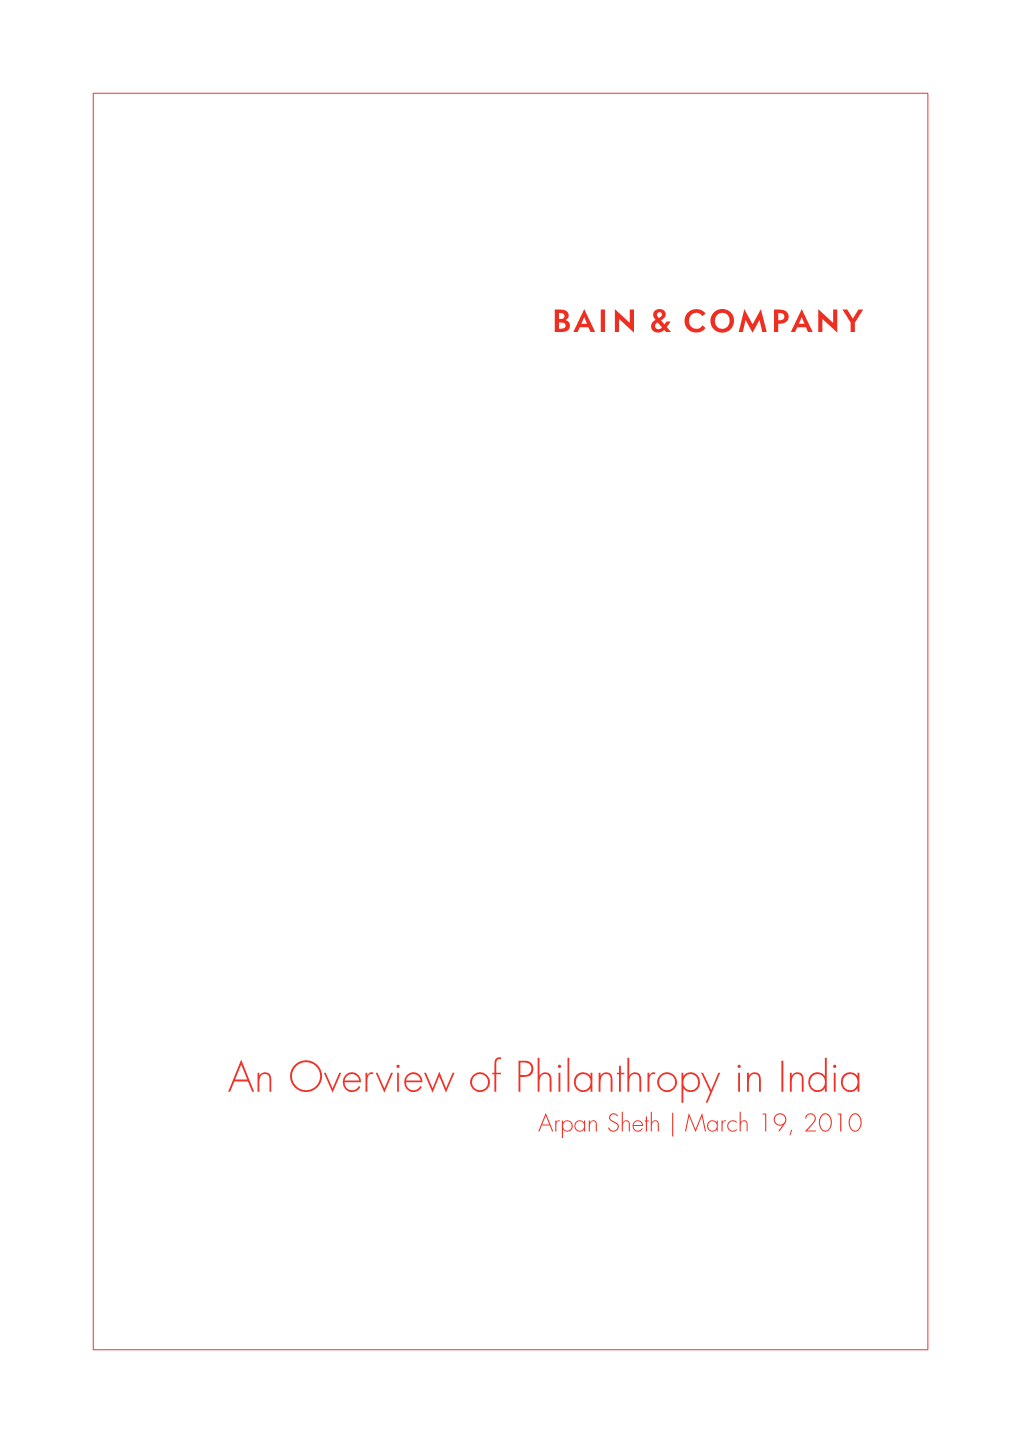 An Overview of Philanthropy in India